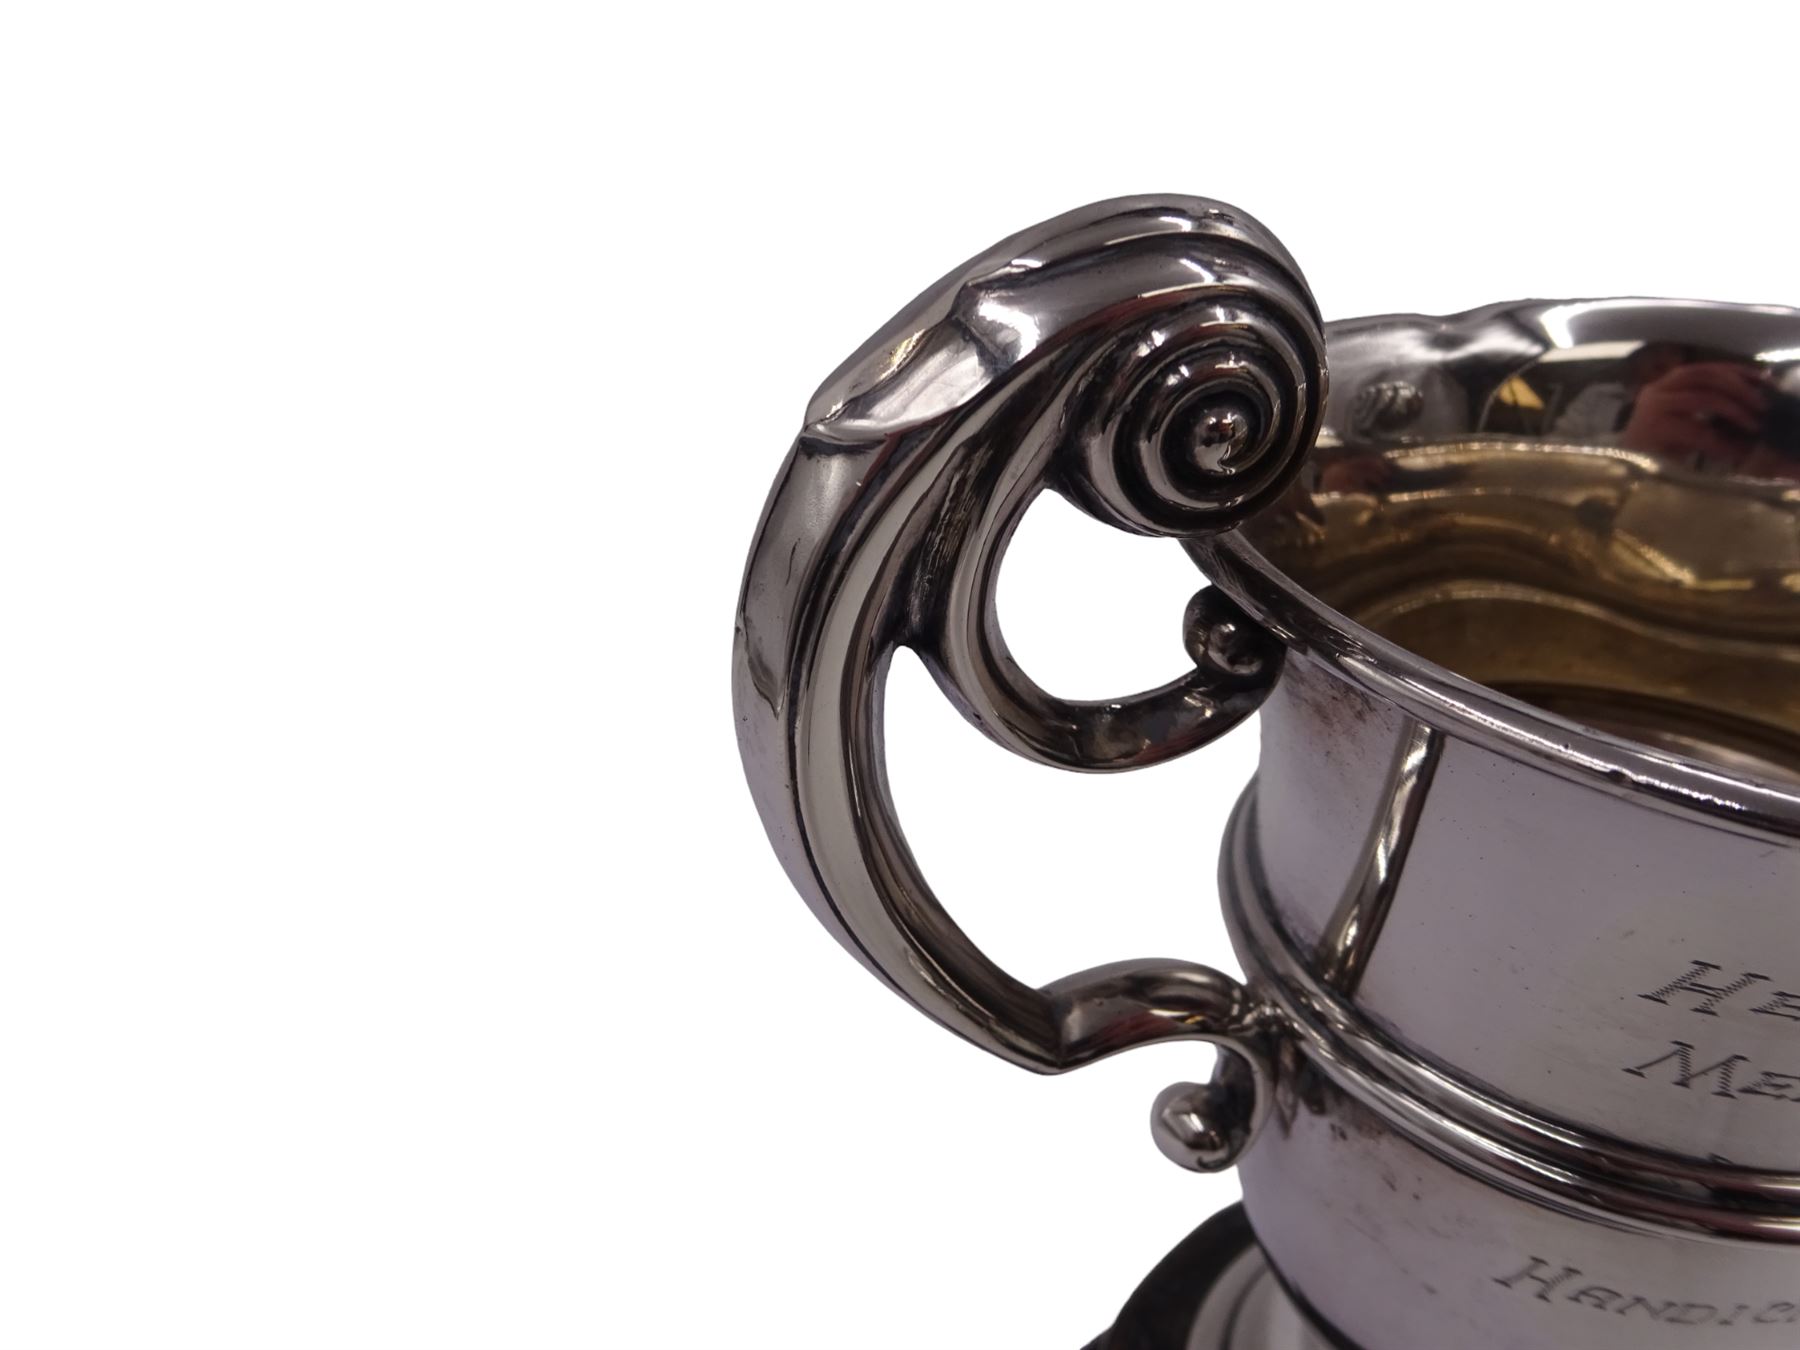 1920s silver trophy cup - Image 3 of 5